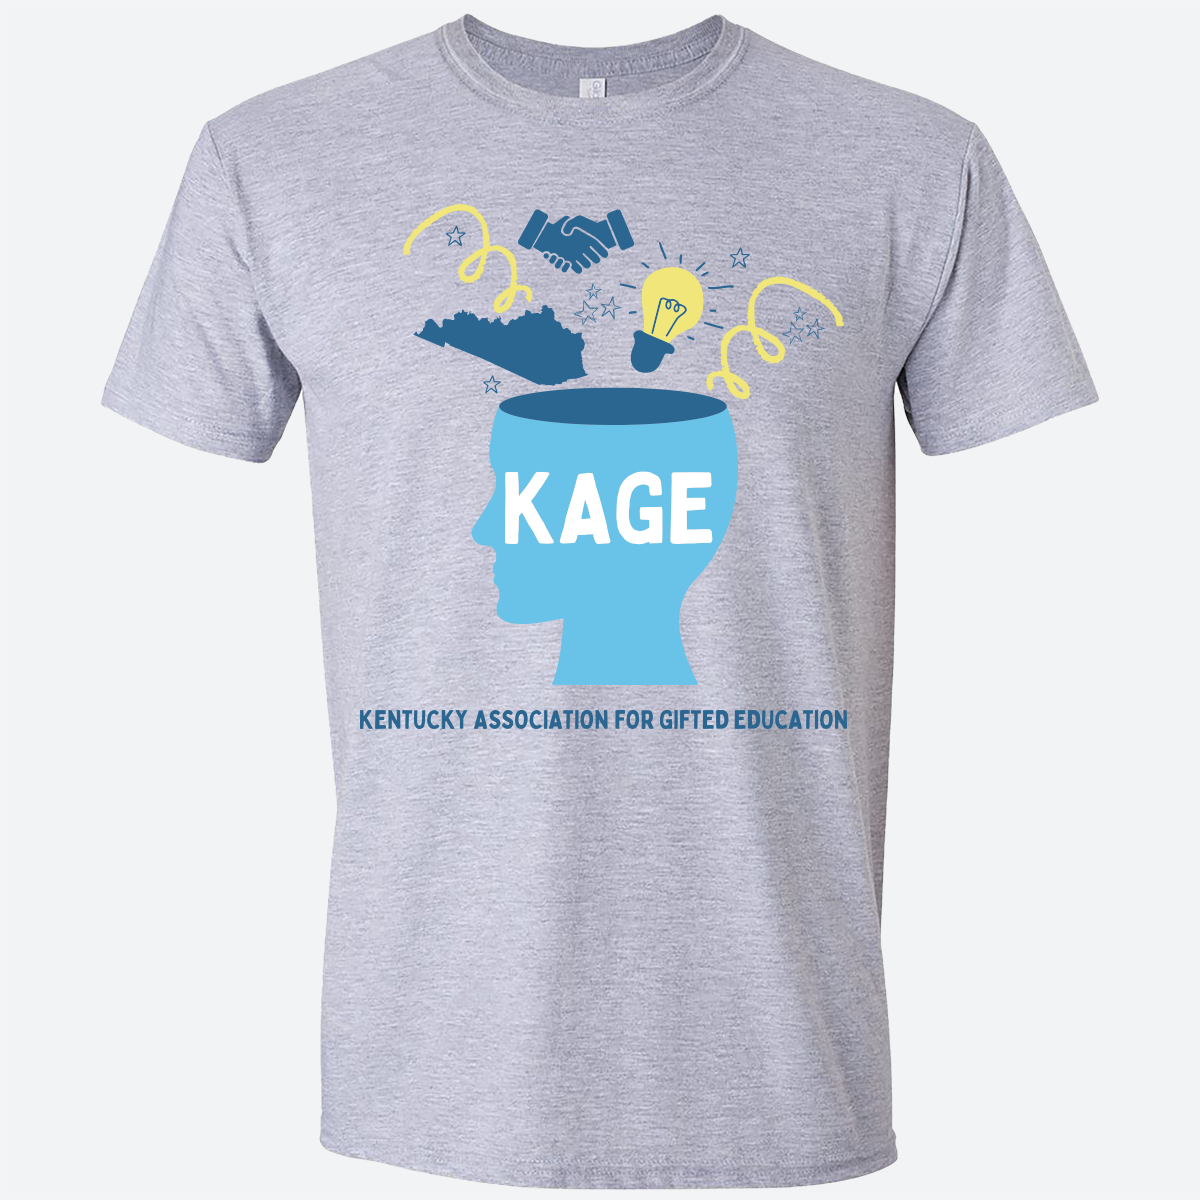 Kentucky Association for Gifted Education T-Shirts